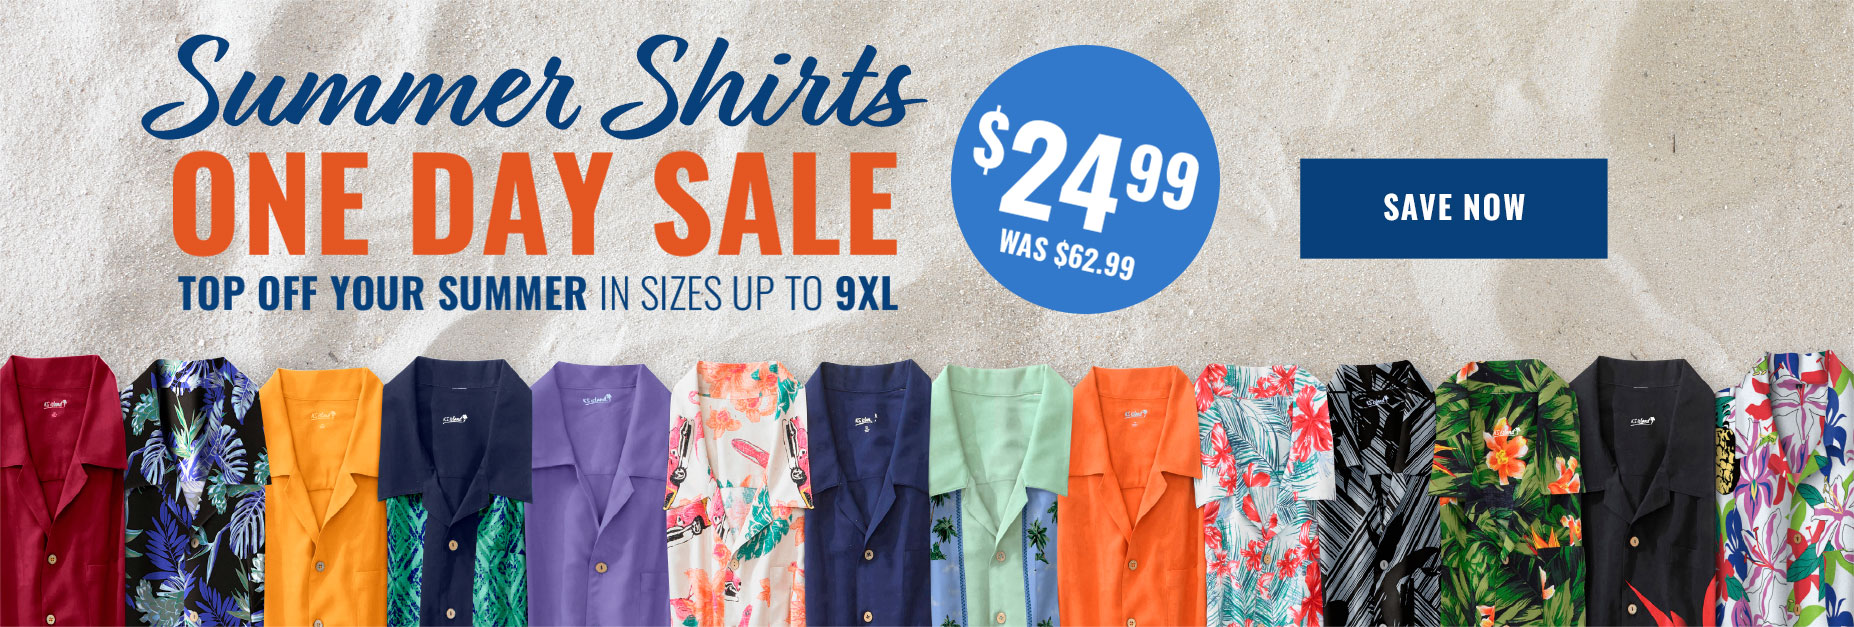 Summer shirts one day sale $24.99